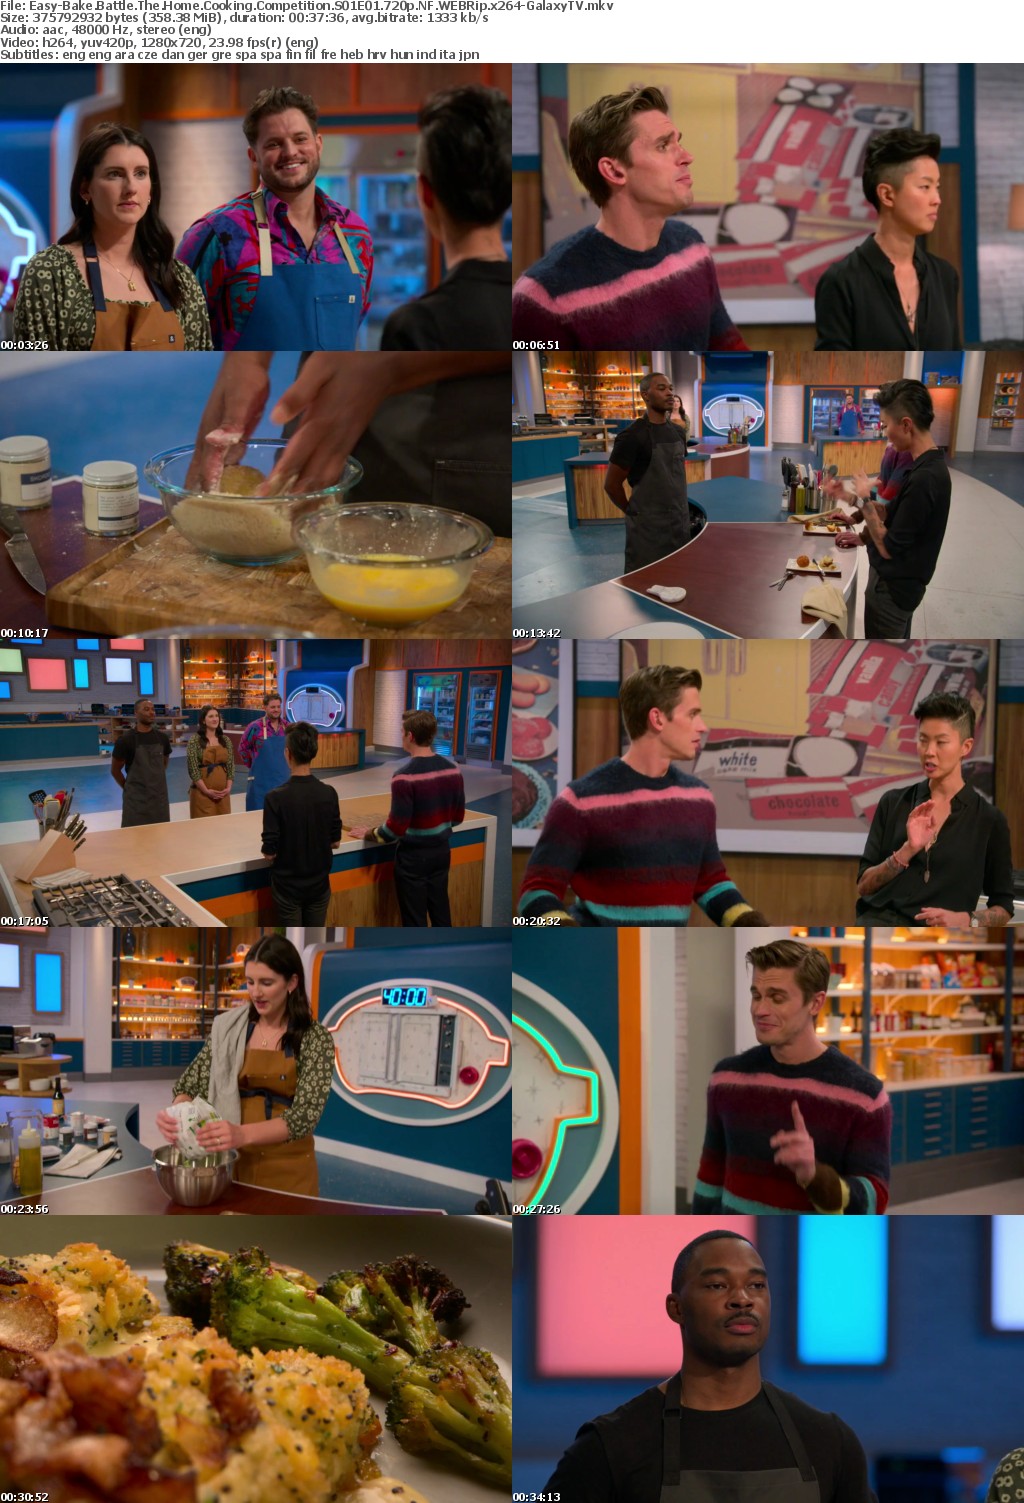 Easy-Bake Battle The Home Cooking Competition S01 COMPLETE 720p NF WEBRip x264-GalaxyTV